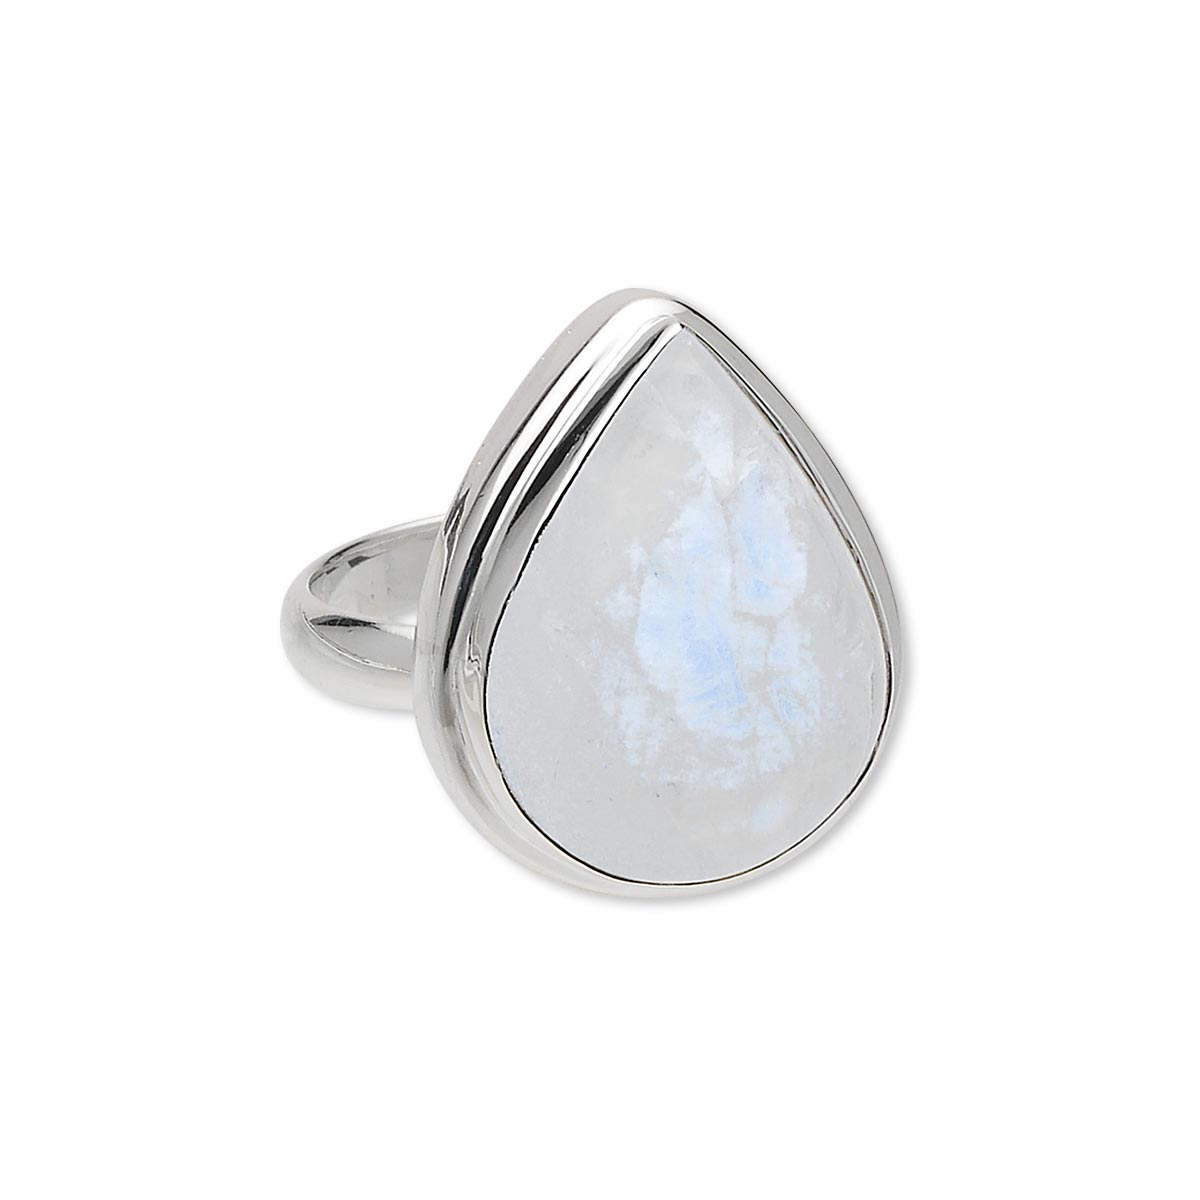 Ring, sterling silver and rainbow moonstone (natural), 20x14mm teardrop ...